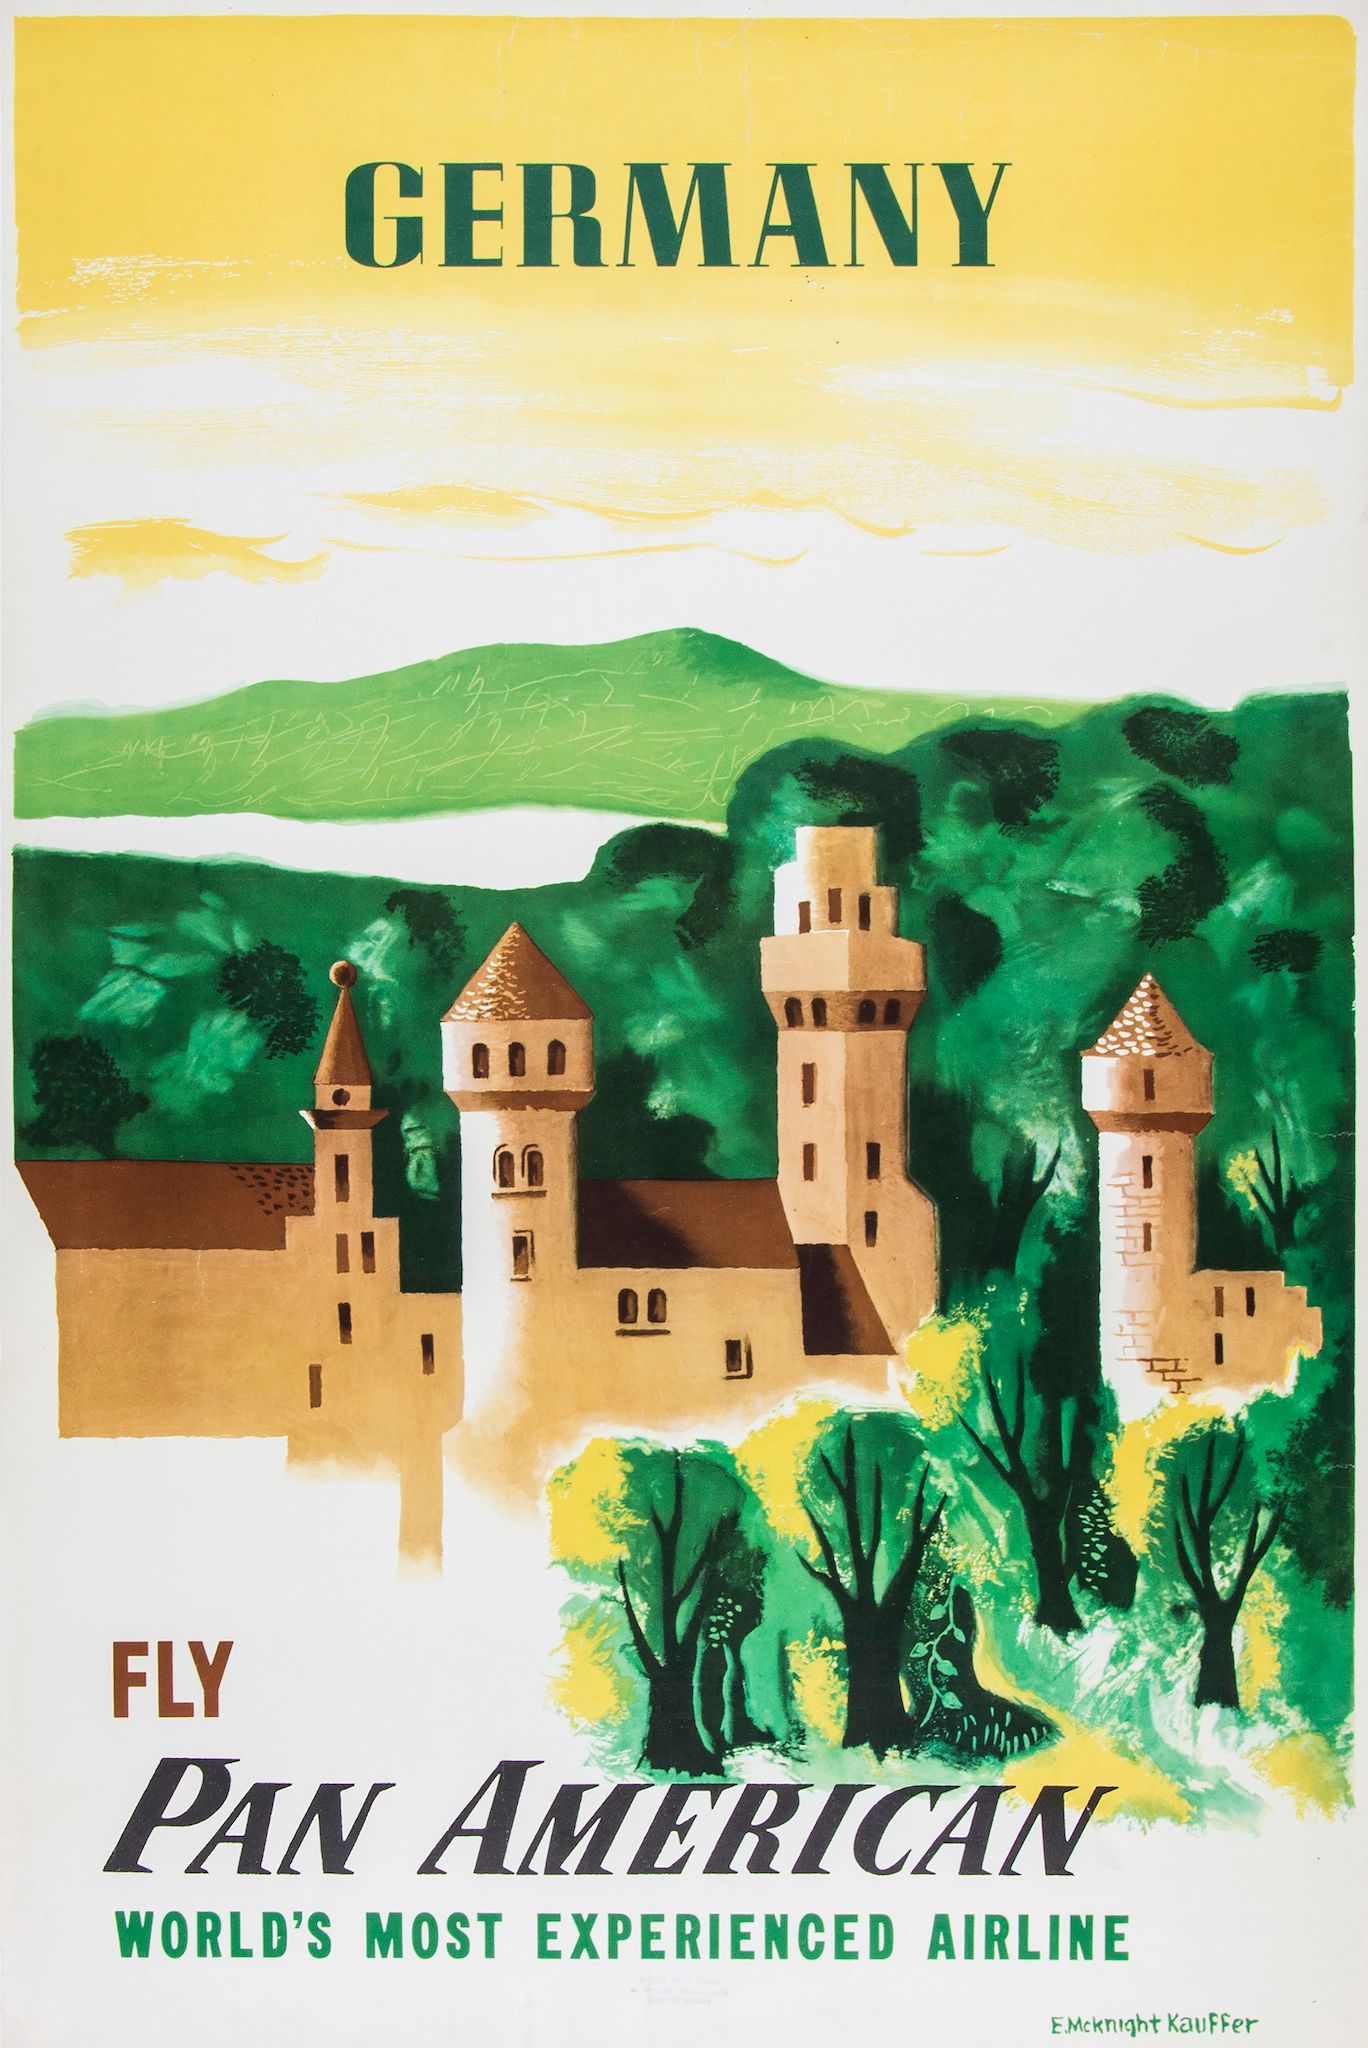 KAUFFER, Edward McKnight Hon. R.D.I. - GERMANY fly PAN AMERICAN lithographic poster in colours, c.